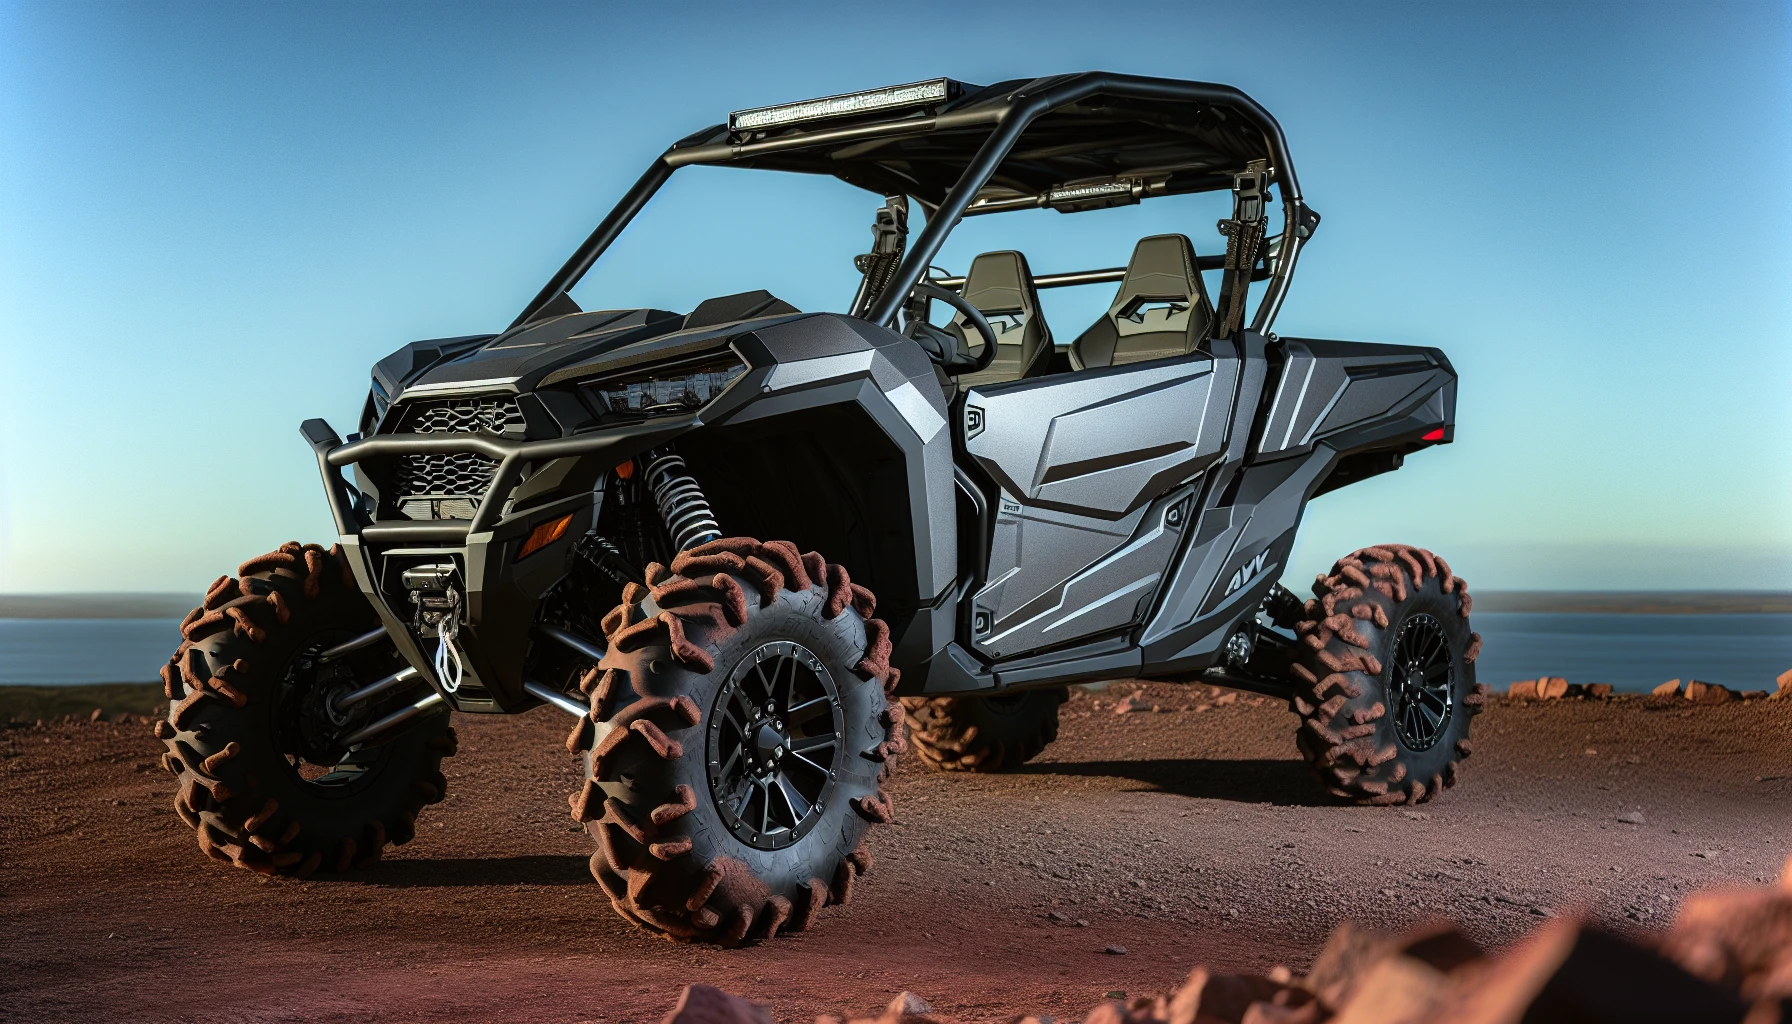 Side by side ATV with roll bars and safety features